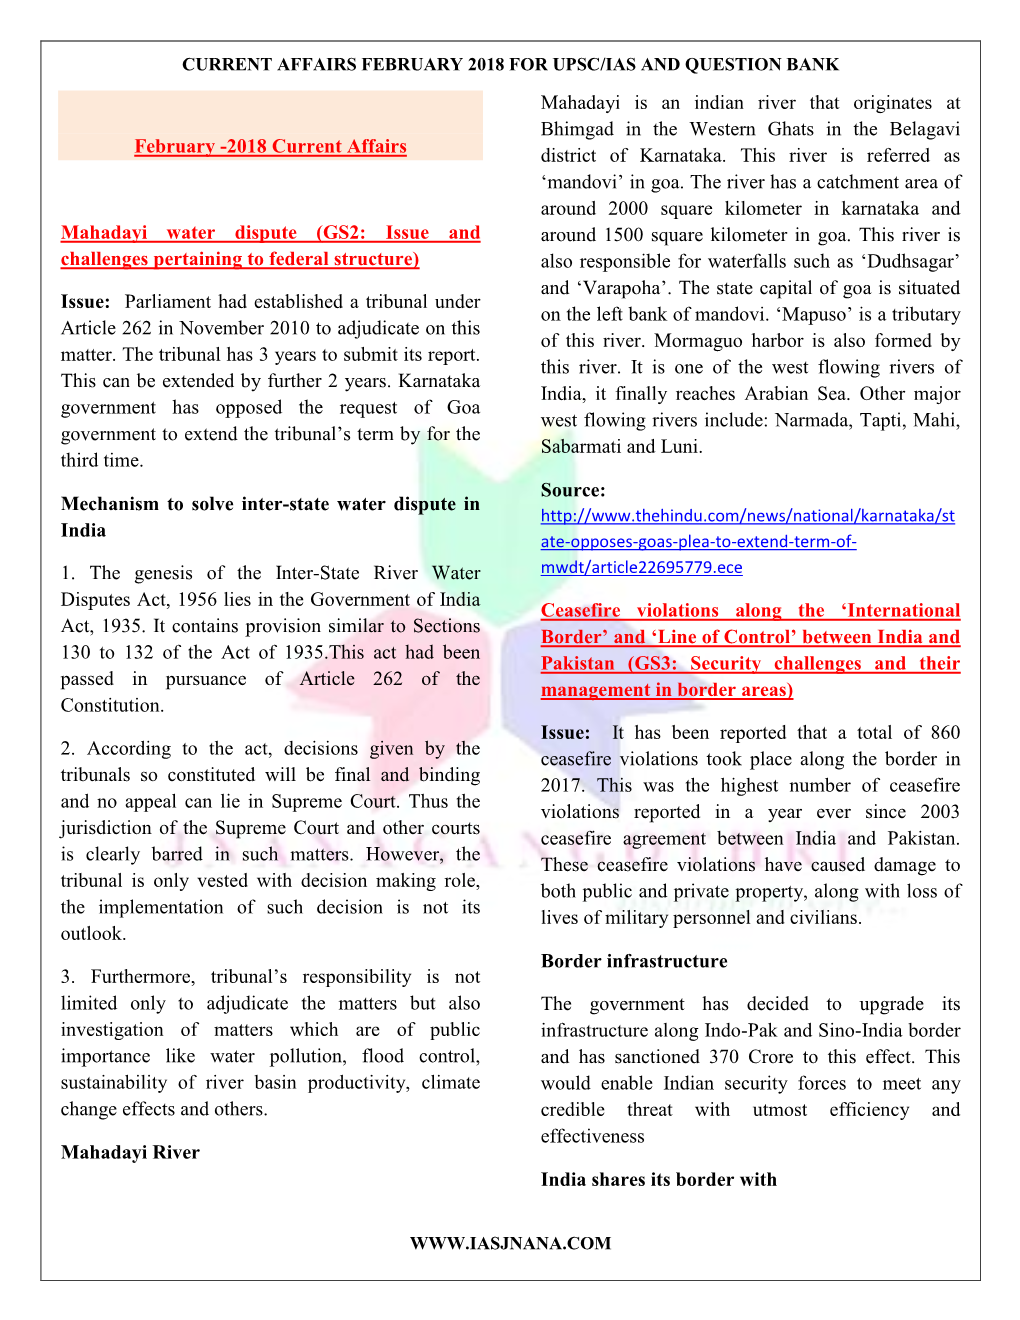 February -2018 Current Affairs Mahadayi Water Dispute (GS2: Issue and Challenges Pertaining to Federal Structure)